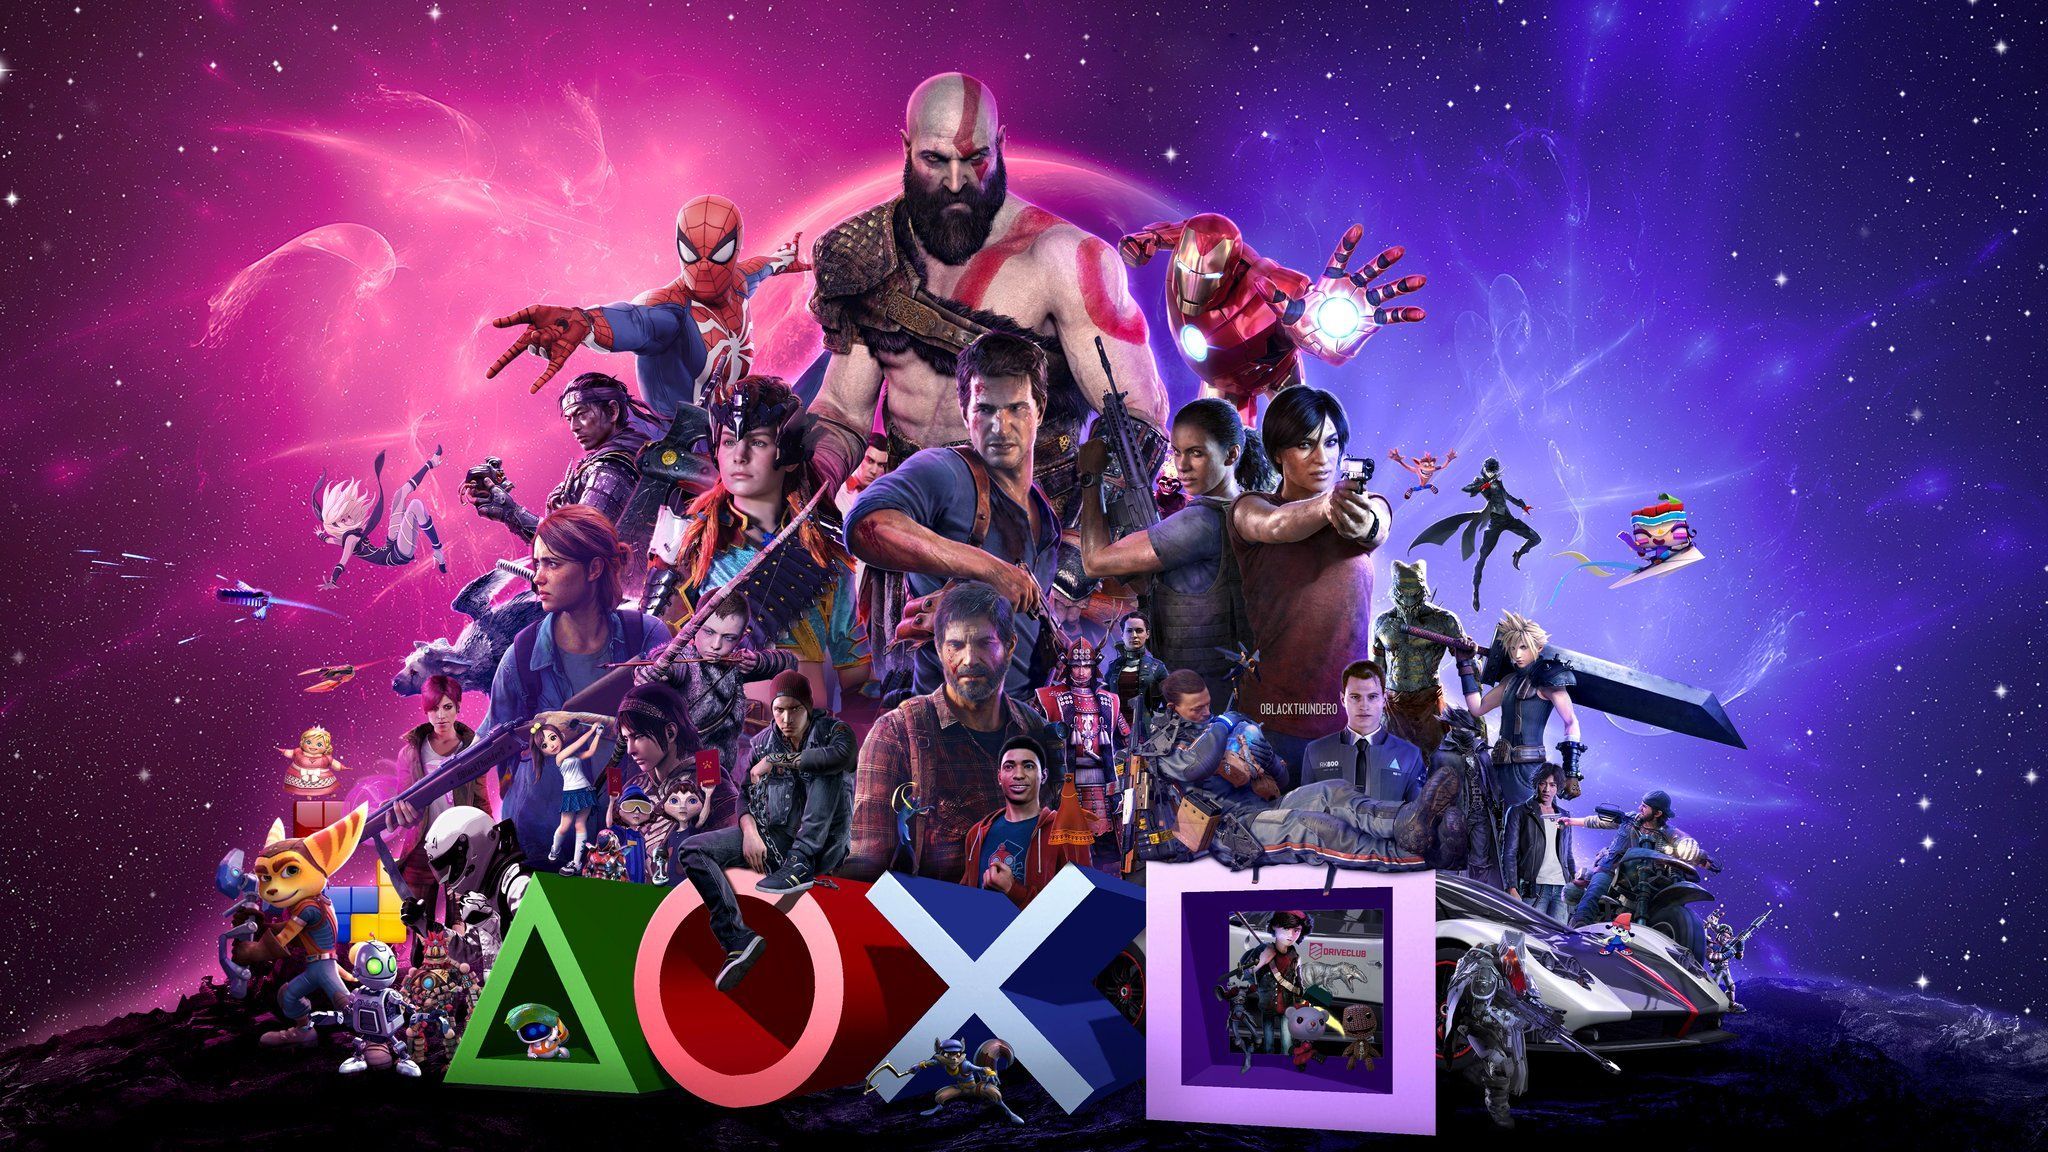 playstation games background